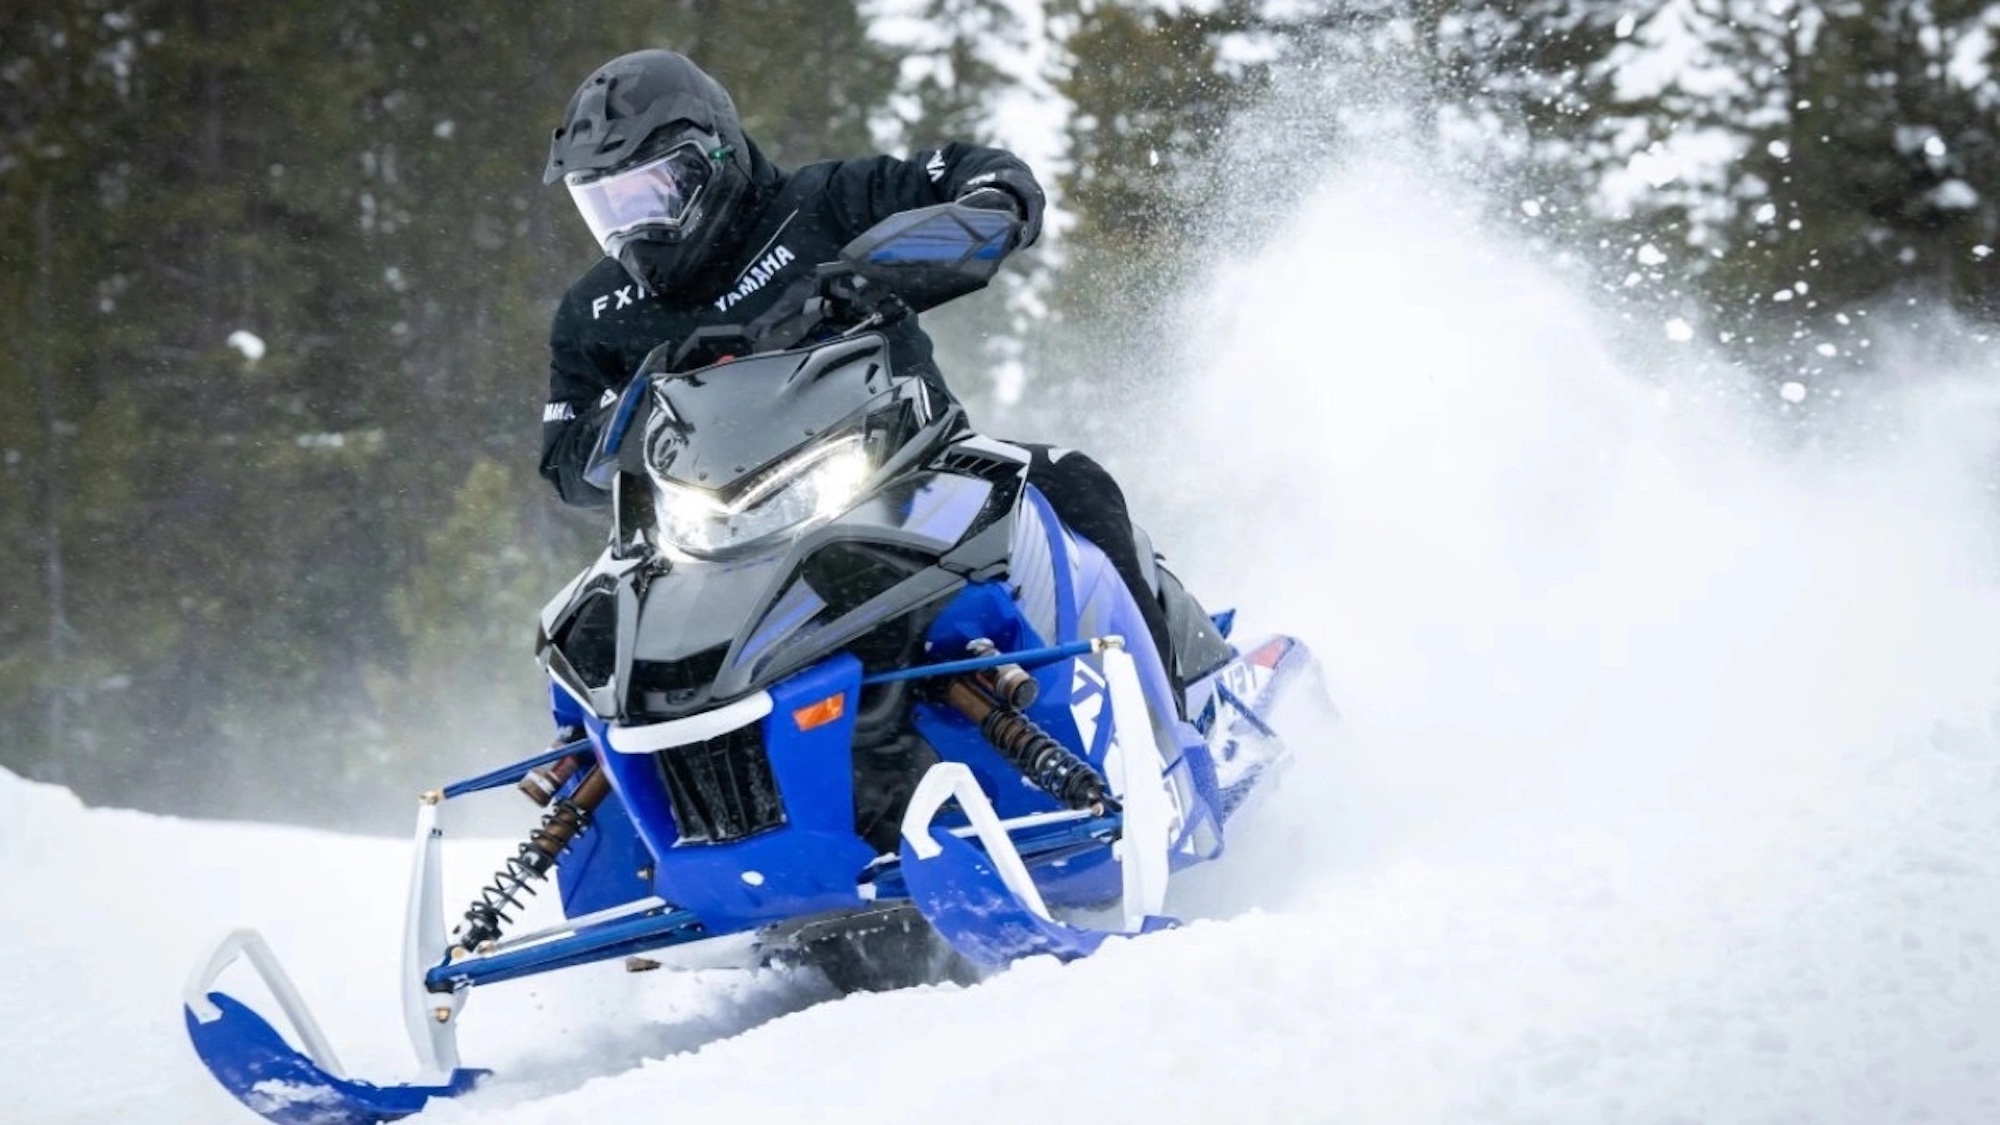 A snowmobile from Yamaha - something that will no longer exist after MY2024. Media sourced from KSTP.